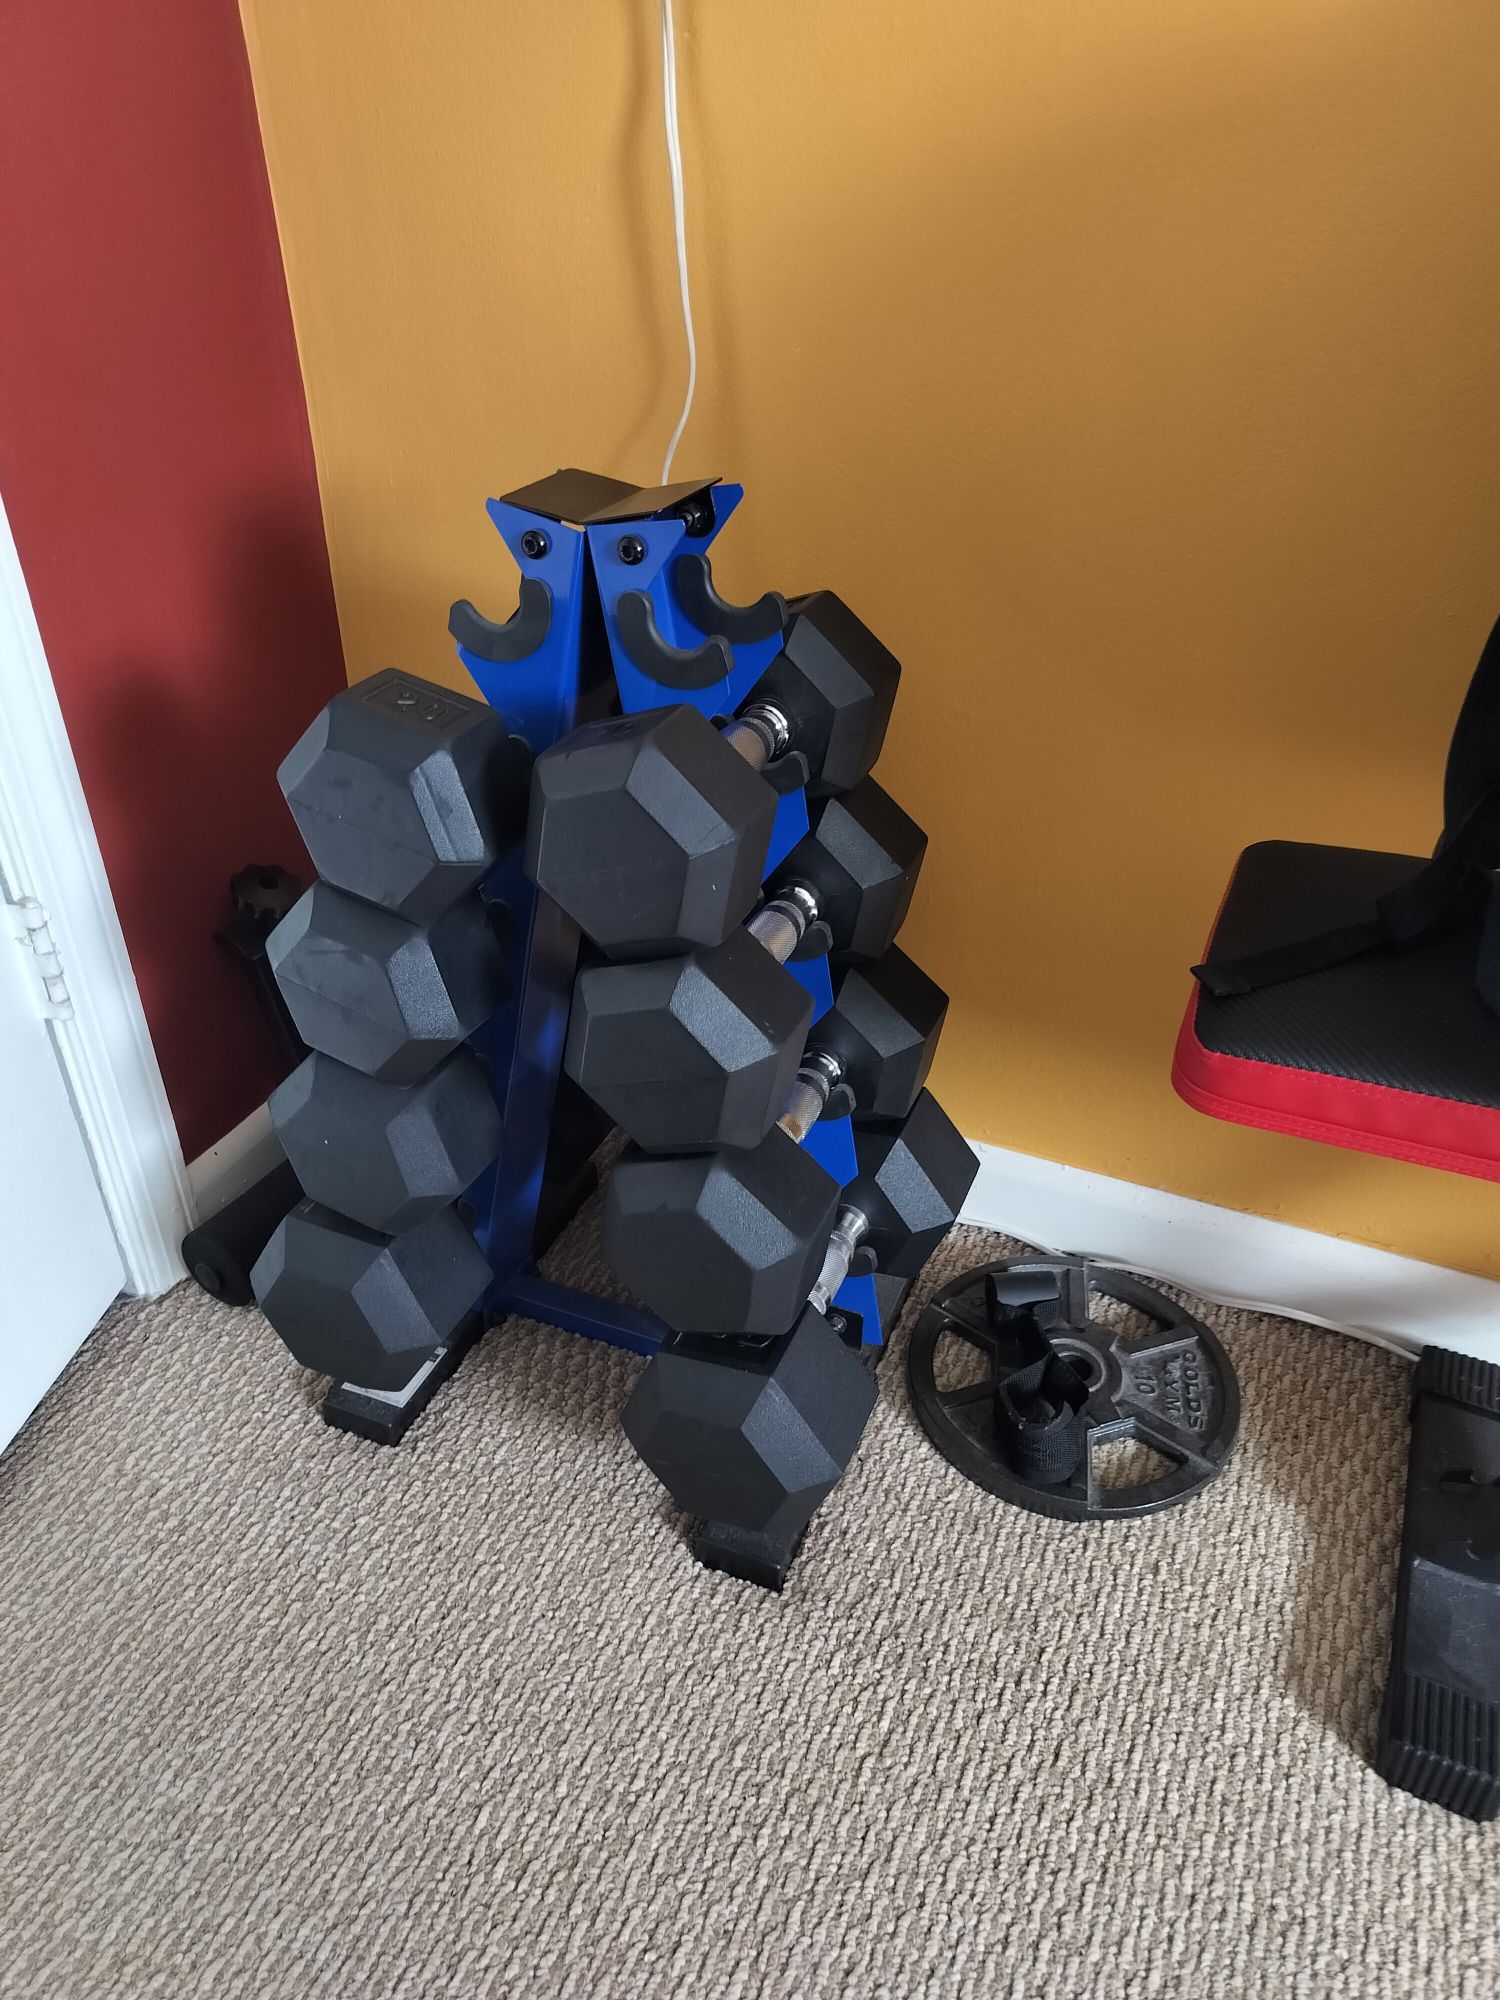 Weights Set For Sale